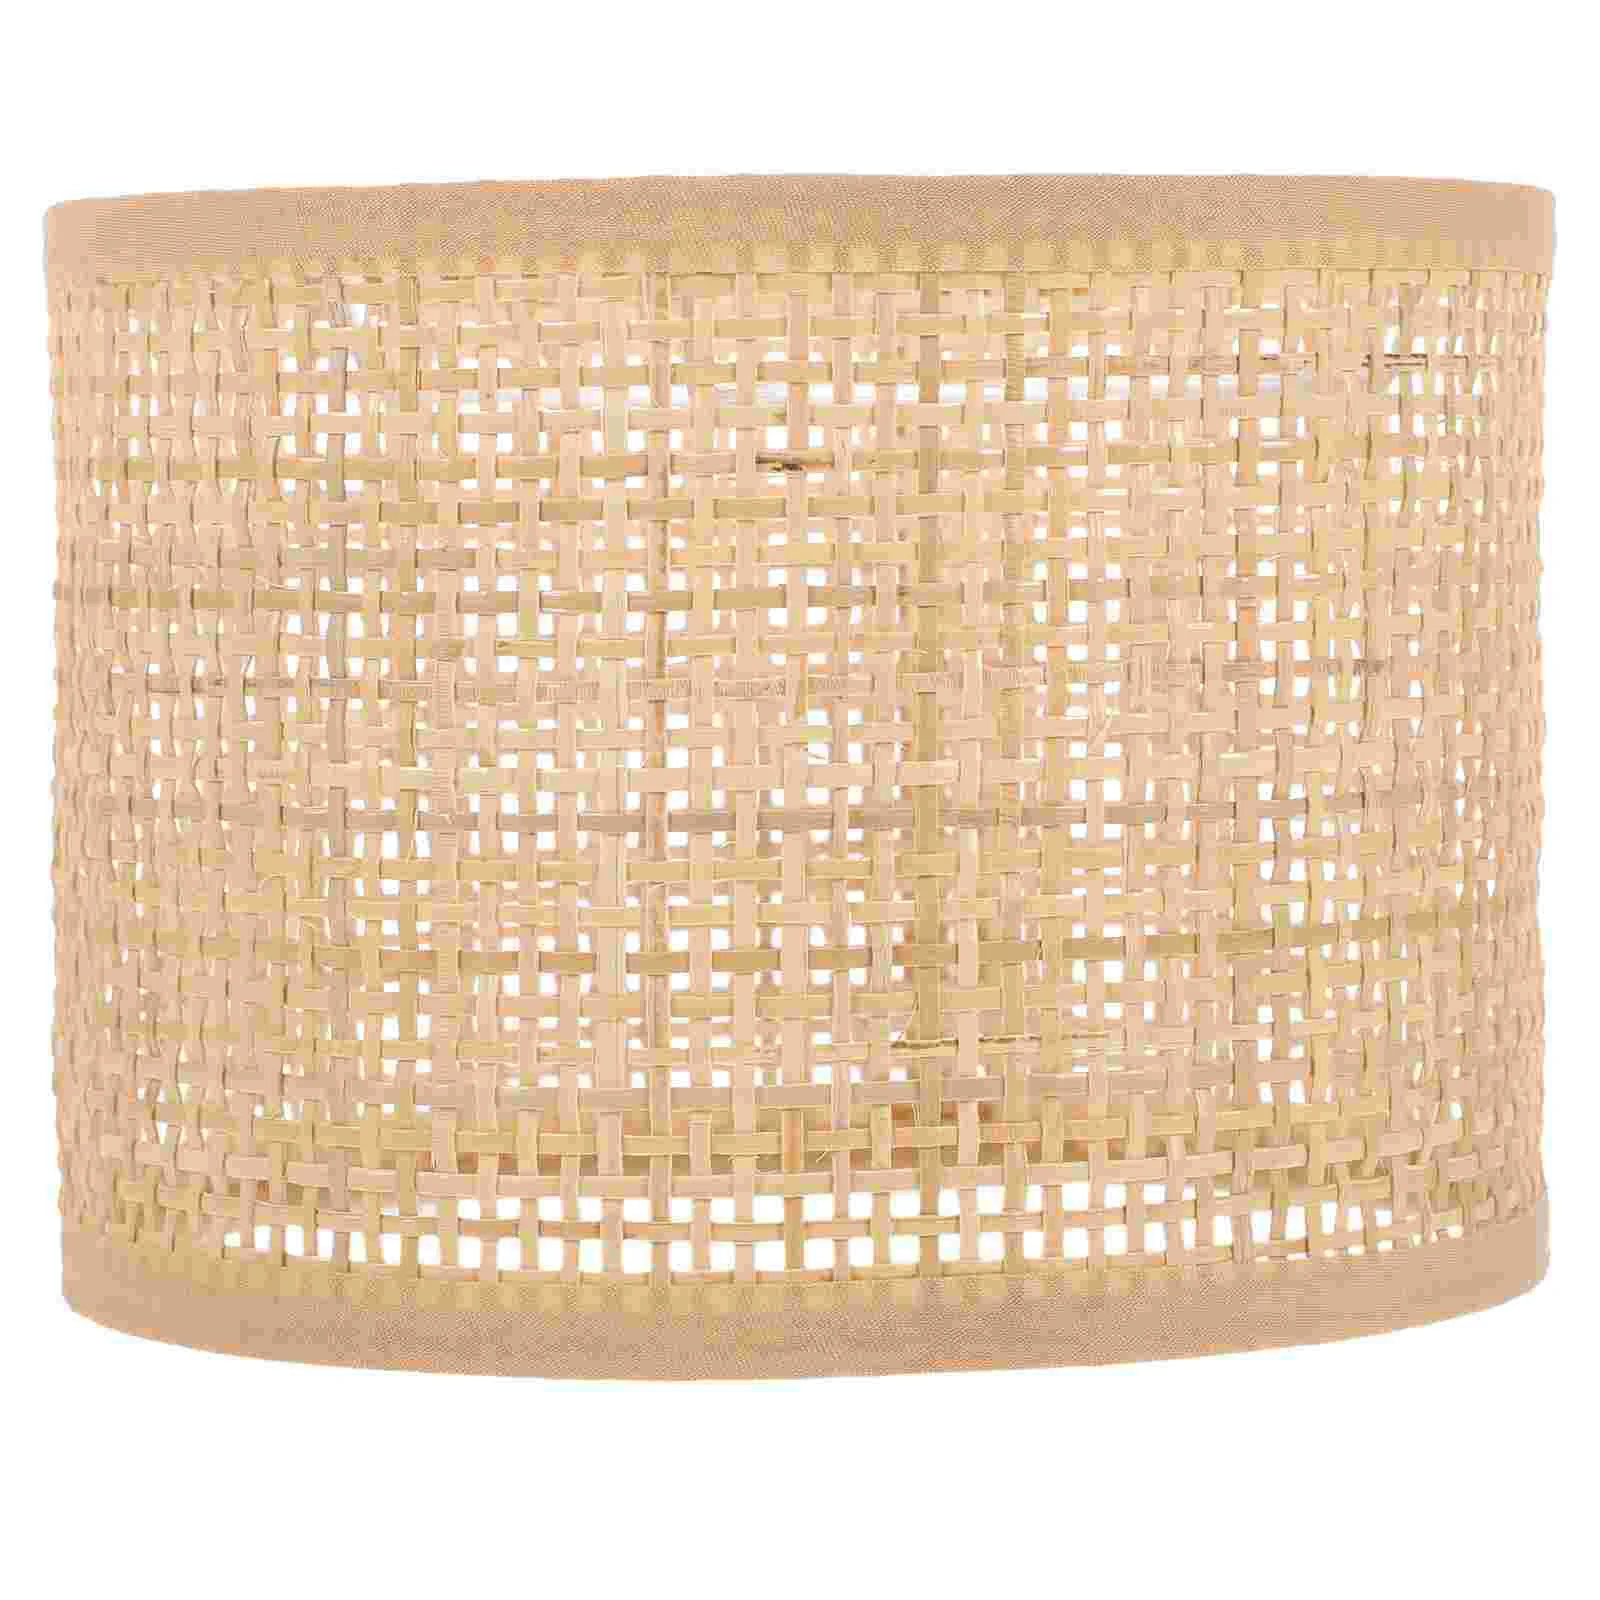 

Woven Lampshade Ornament Lampshade Decor Accessory Accessory Basket Wall Rattan DIY Light Weaving Craft Home Creative Child